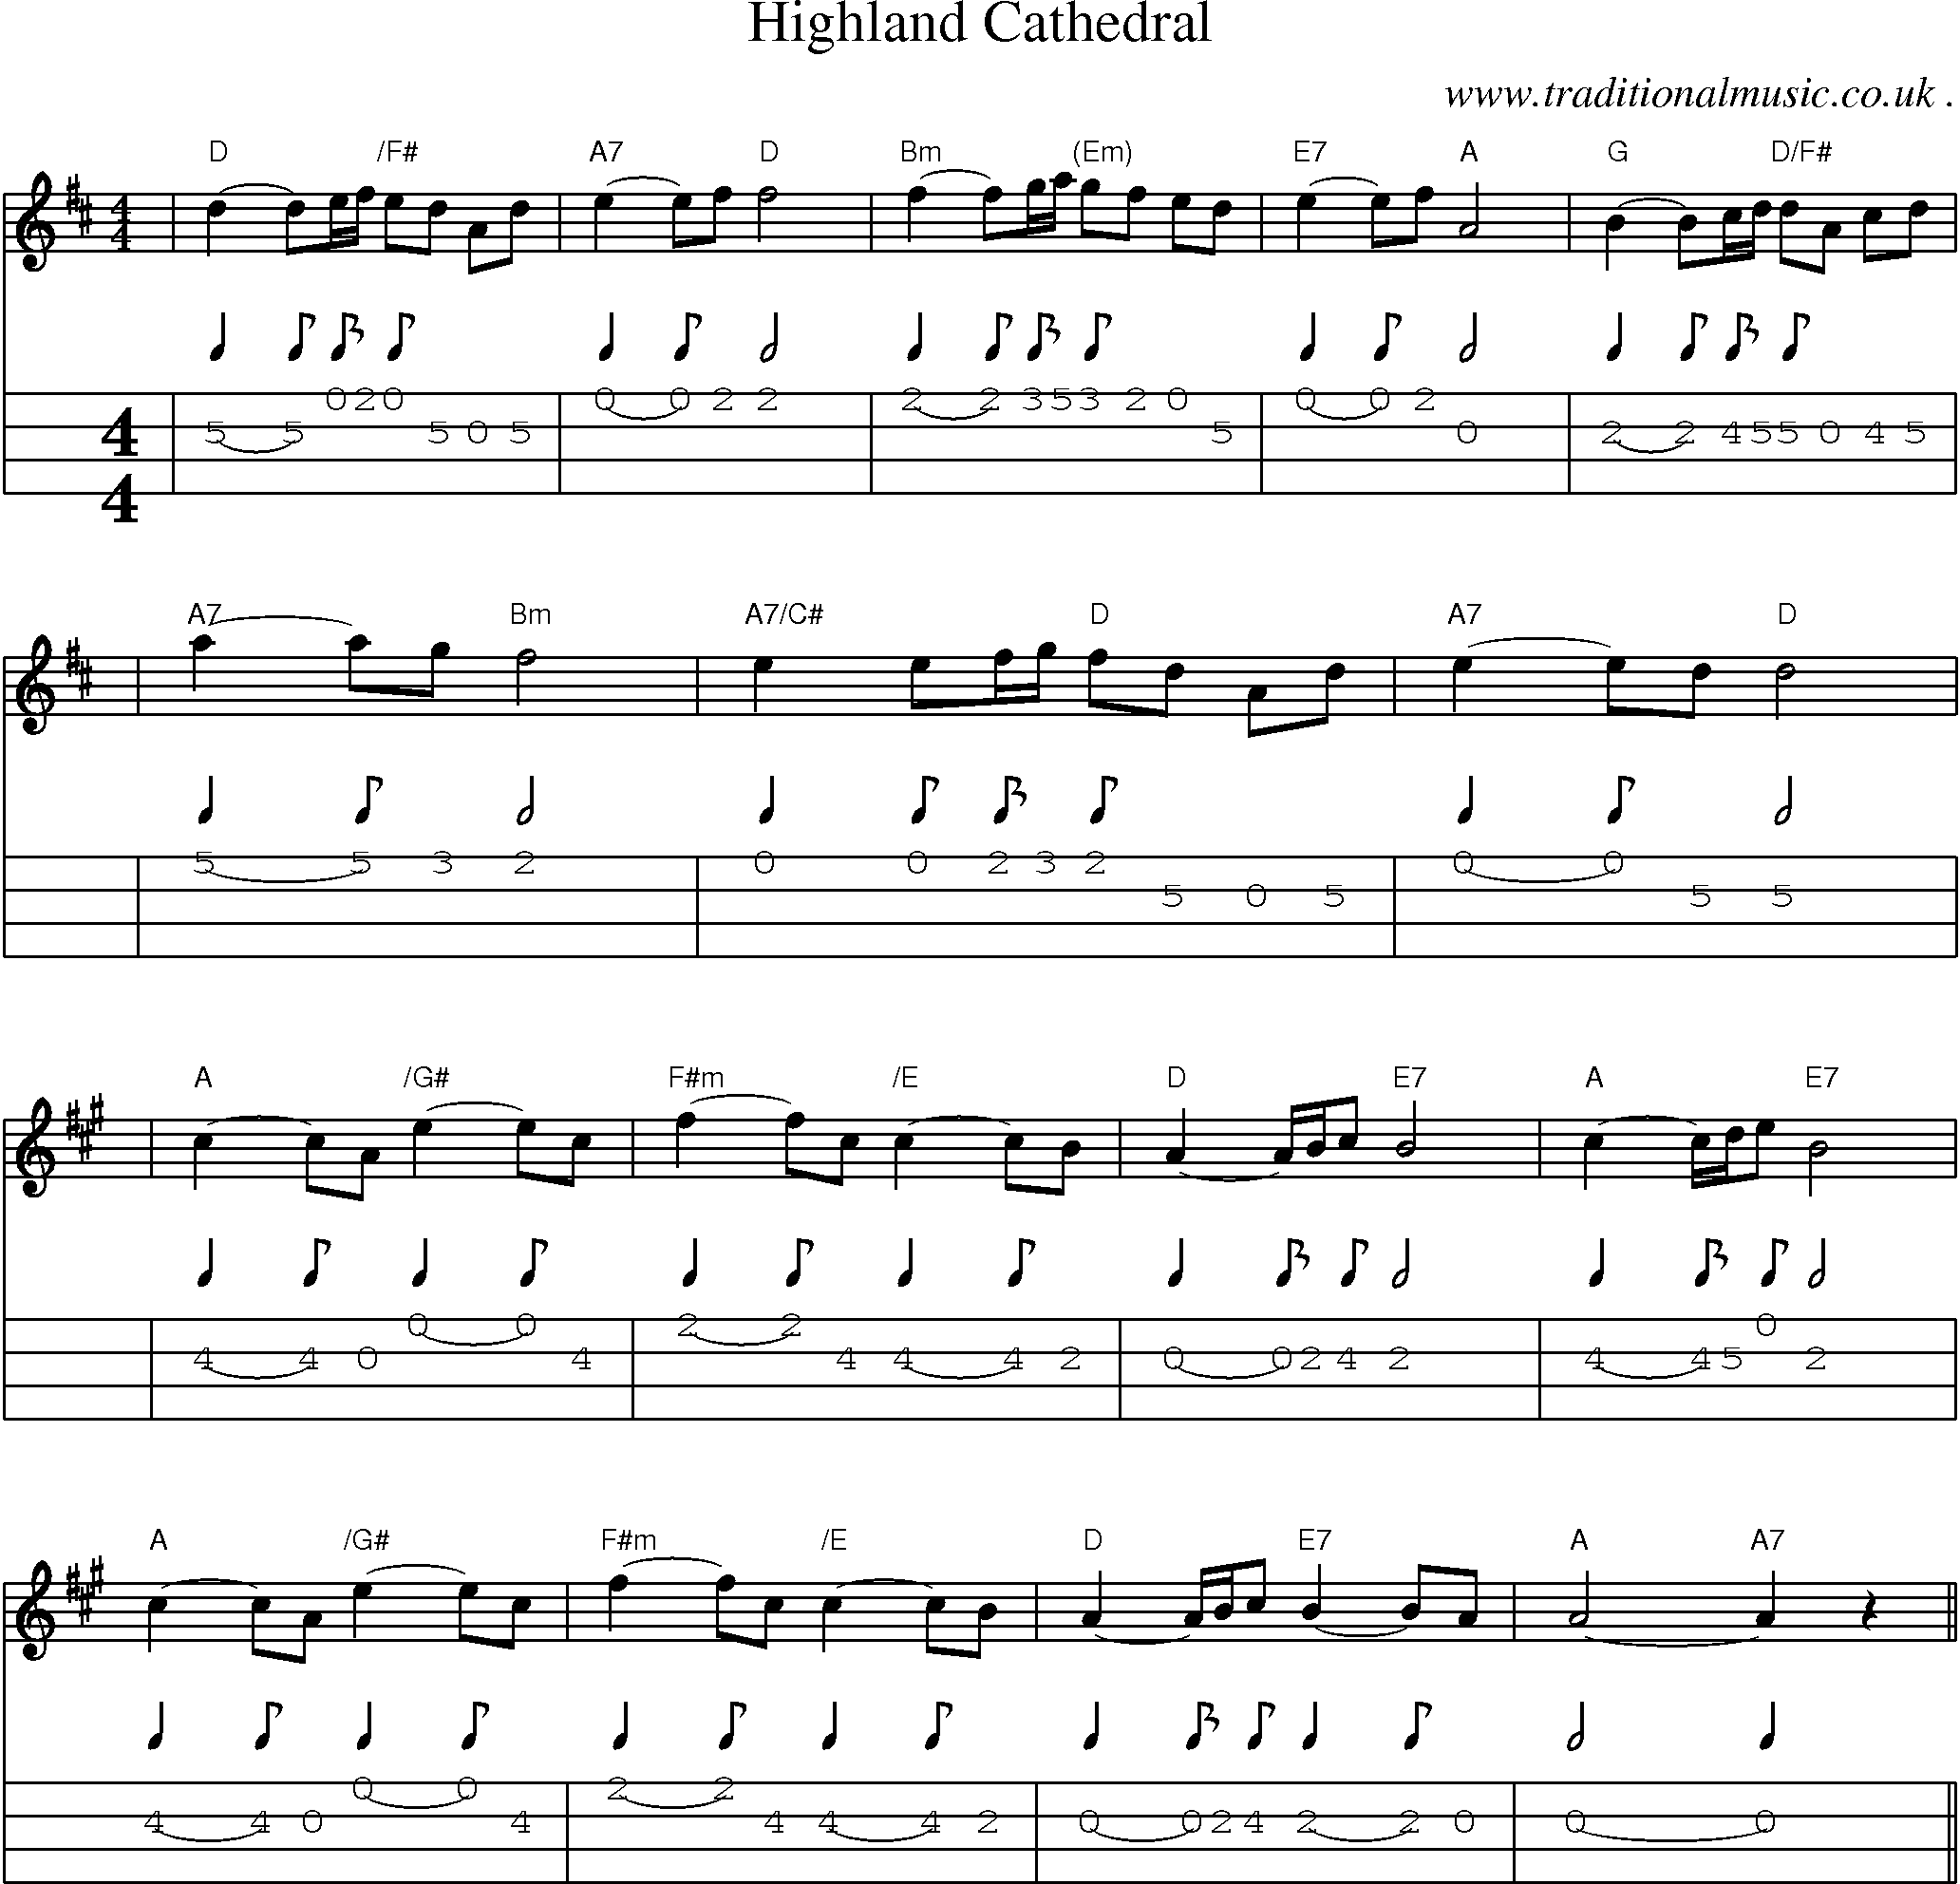 Sheet-music  score, Chords and Mandolin Tabs for Highland Cathedral